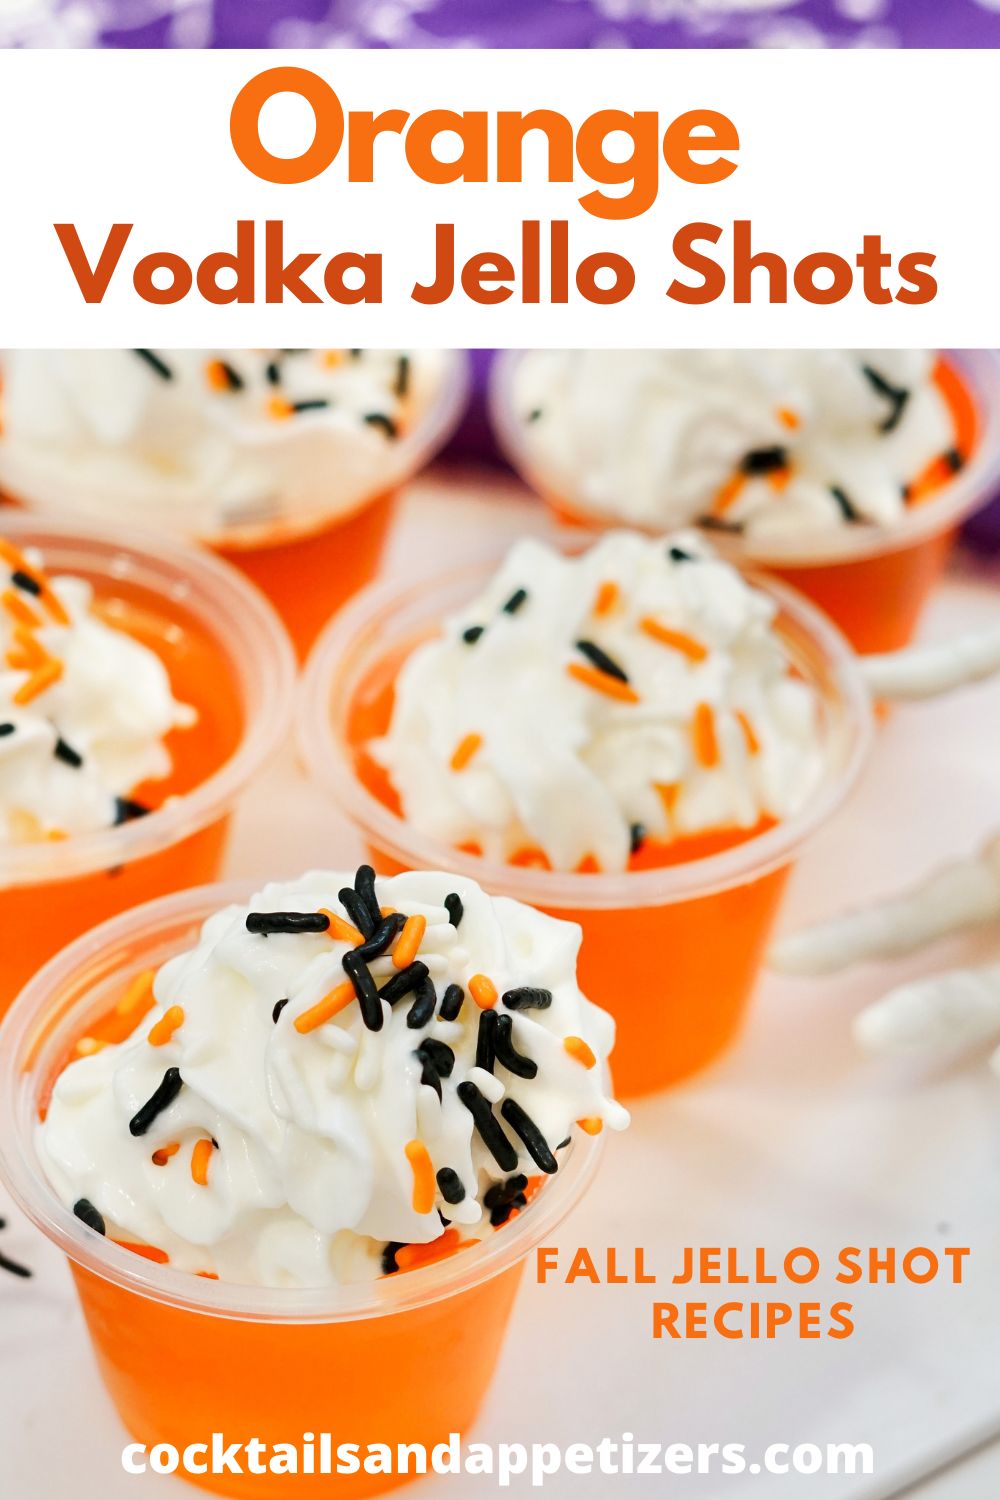 Orange Vodka Jello shots with whipped cream and sprinkles sit in condiment cups on a tray.